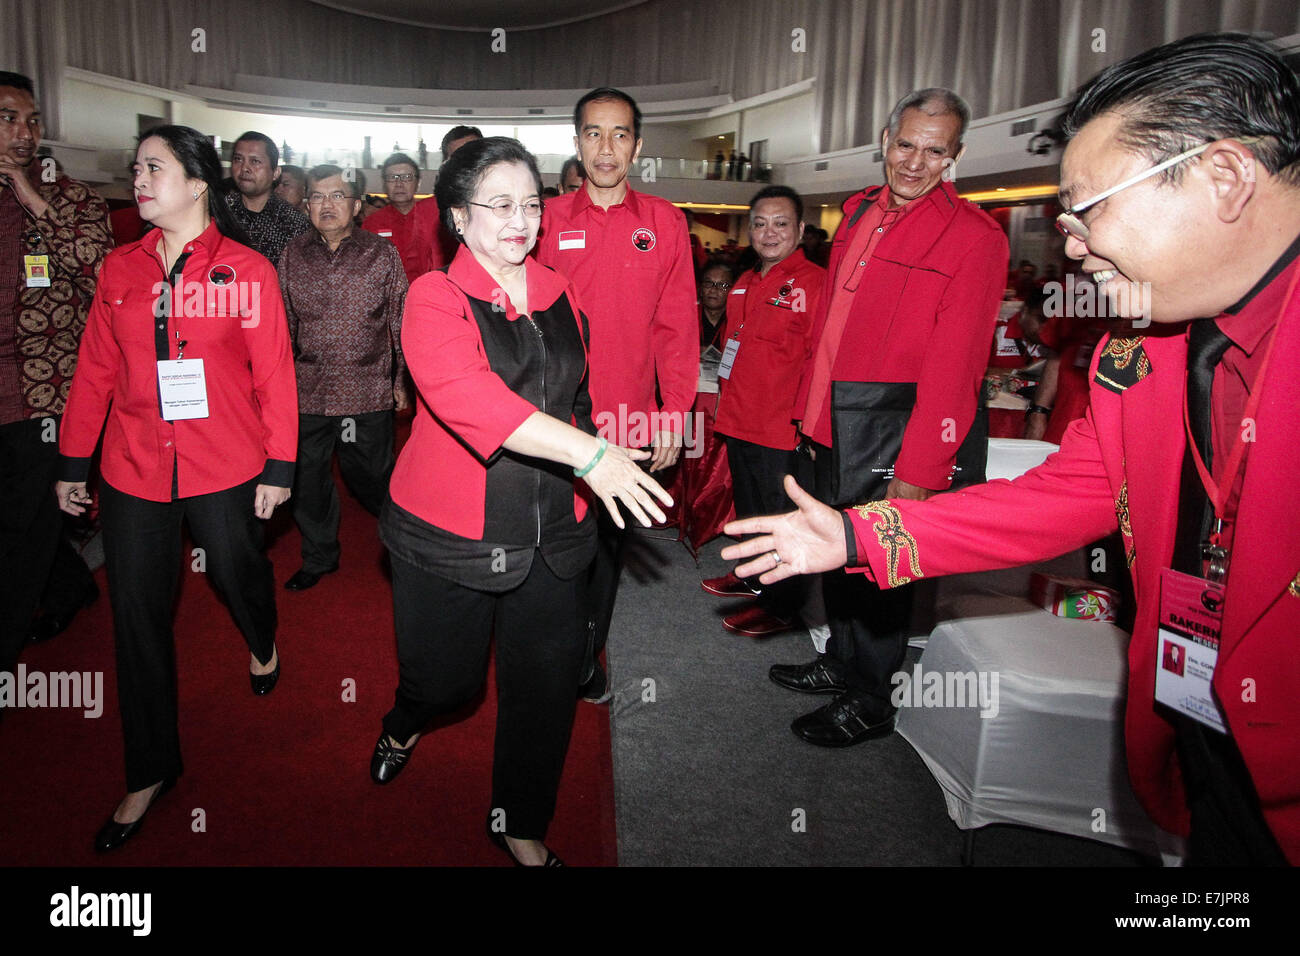 Semarang, Indonesia. 19th September, 2014. Former president and chairperson of Indonesian Democratic Party of Struggle (PDI-P) Megawati Sukarnoputri shake hand a cadre during the 4th national working meeting of PDI-P at Marina Convention Hall in Semarang, Central Java, Indonesia. The national meeting attended by 1,590 party cadres from all over Indonesia and take place from 19-21 September 2014. The meeting is expected to change the 10-year mindset of the PDI-P, as it has switched to being the ruling party from being the opposition party. Credit:  PACIFIC PRESS/Alamy Live News Stock Photo